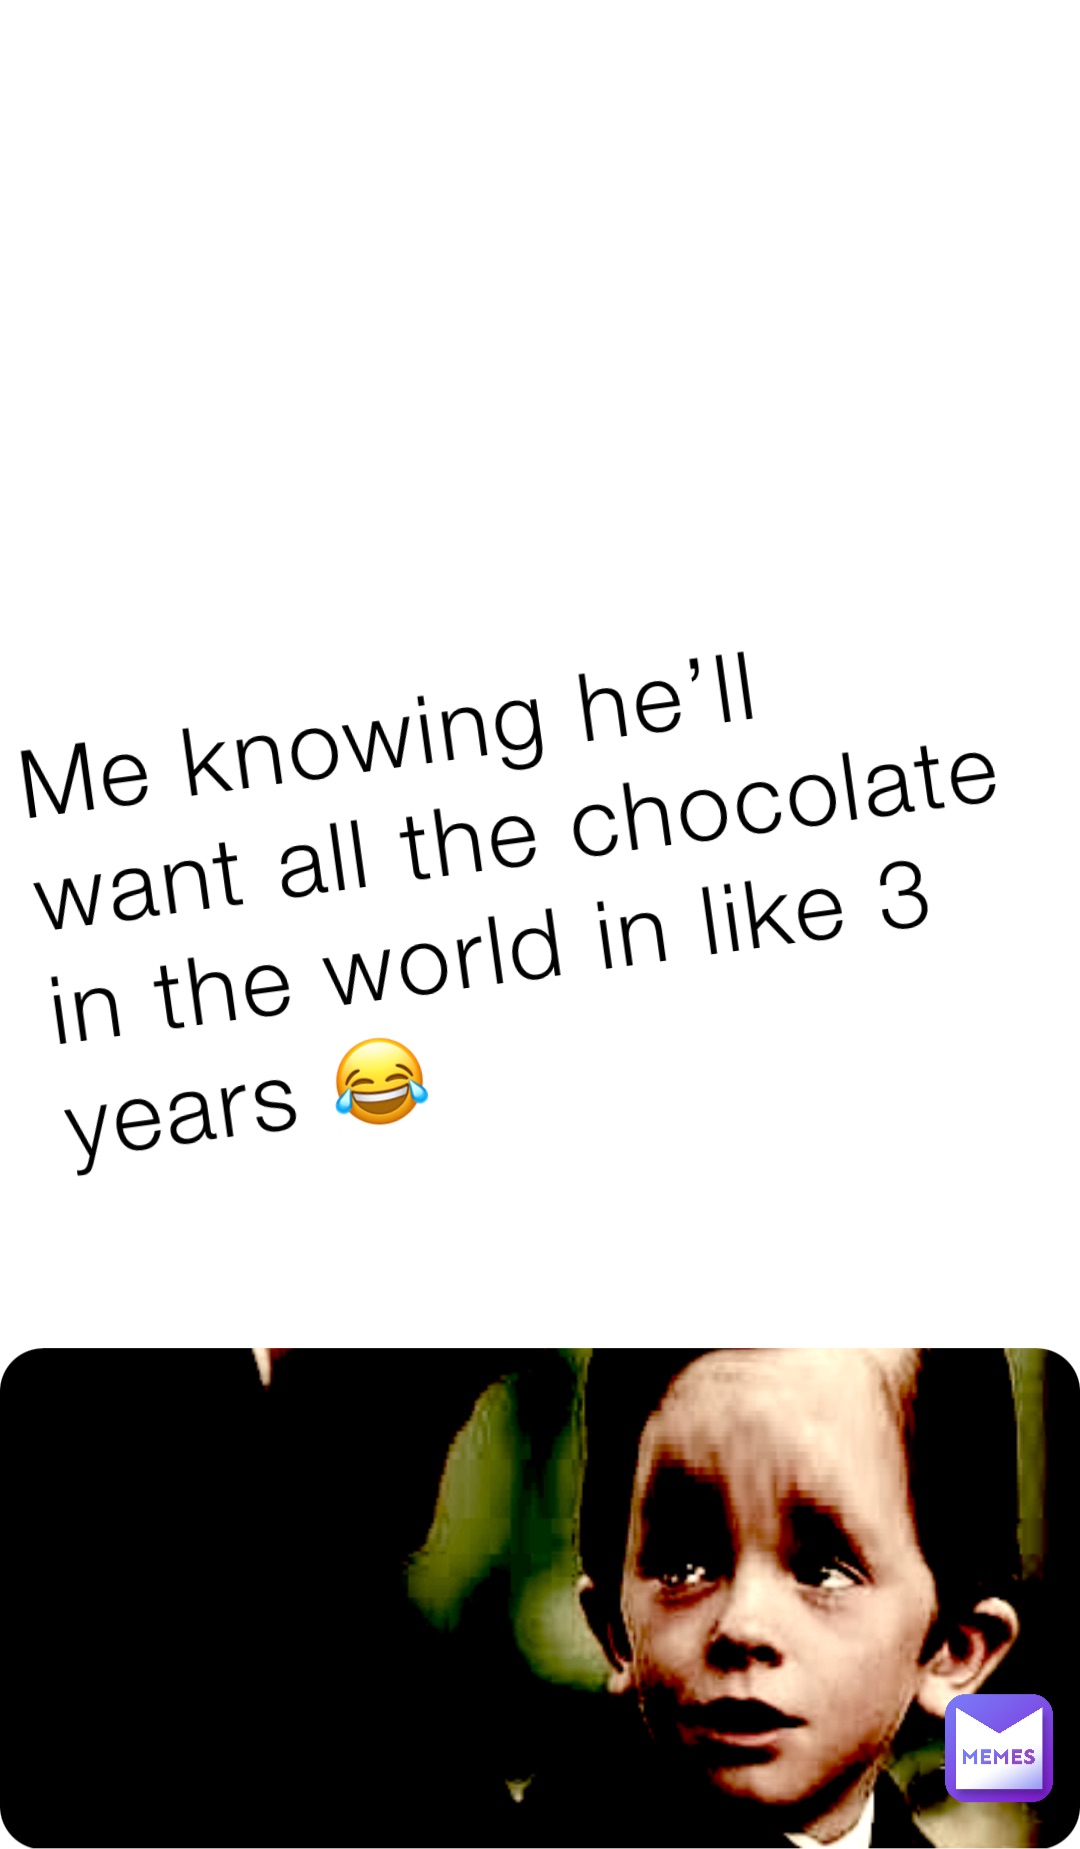 Me knowing he’ll want all the chocolate in the world in like 3 years 😂